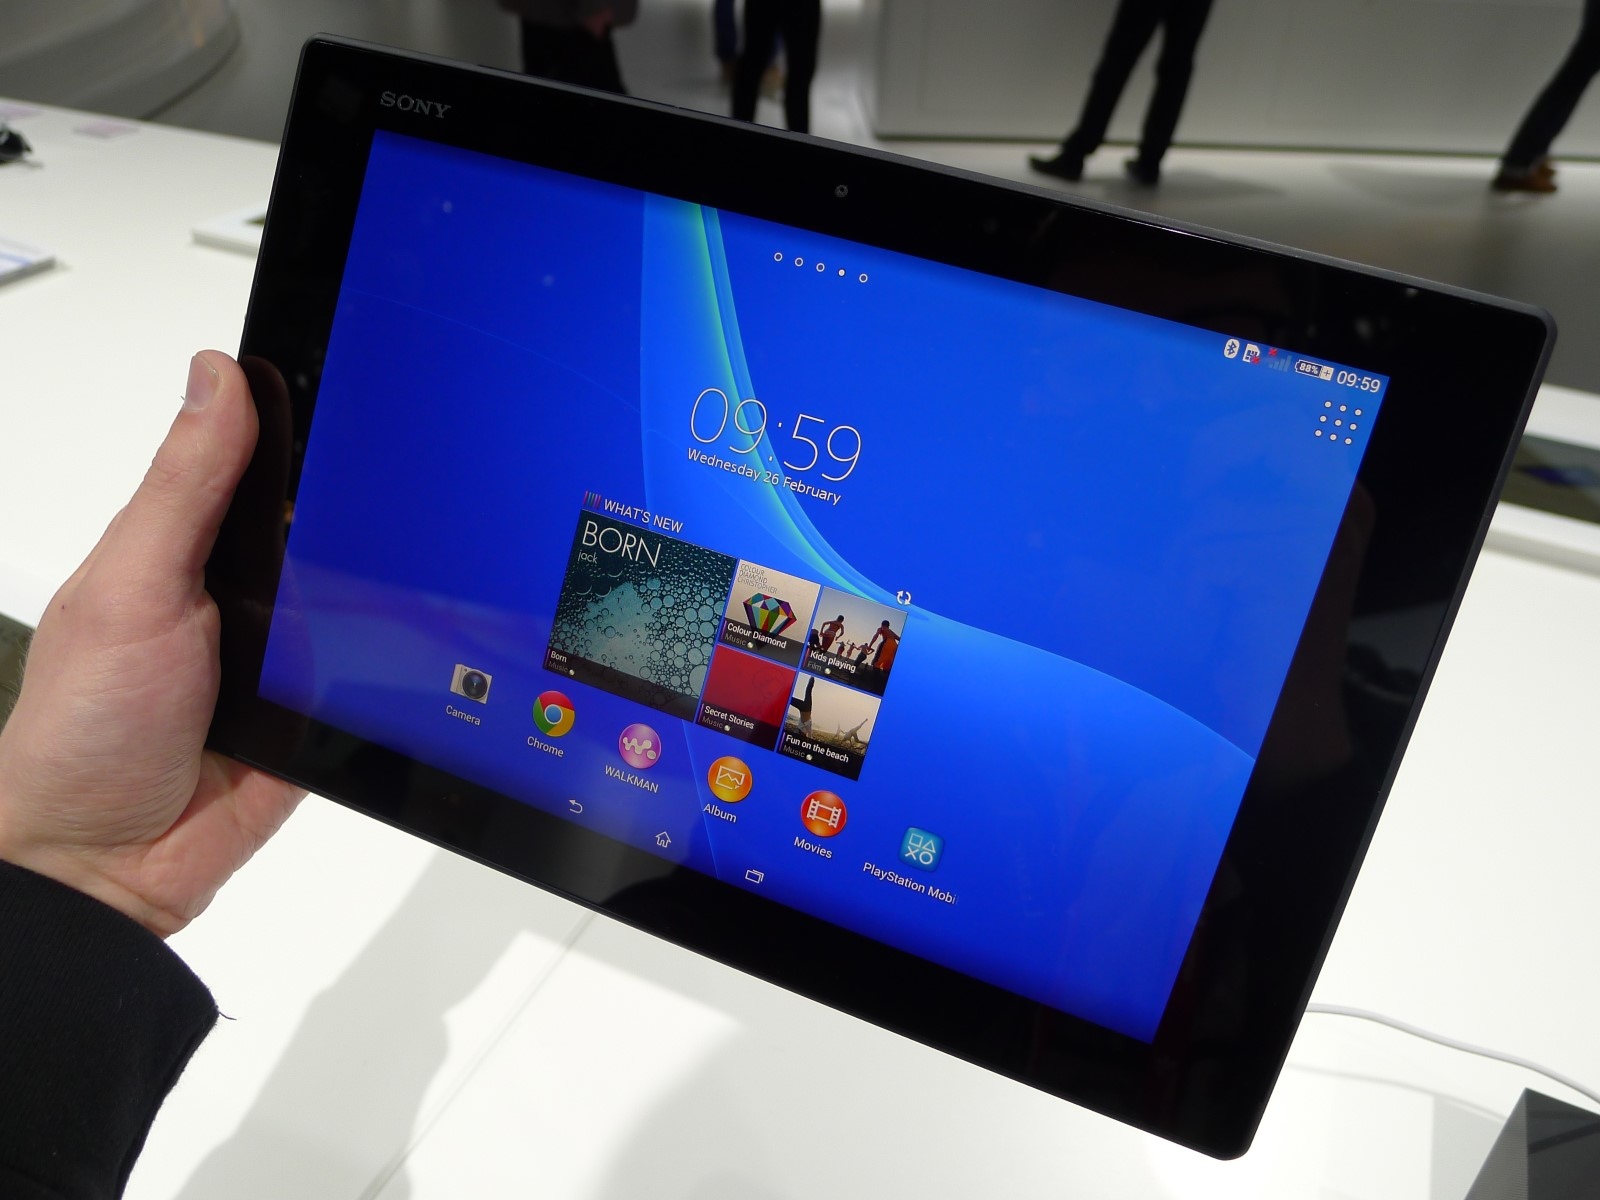 Ultimate Guide To Charging Your Sony Xperia Z2 Tablet